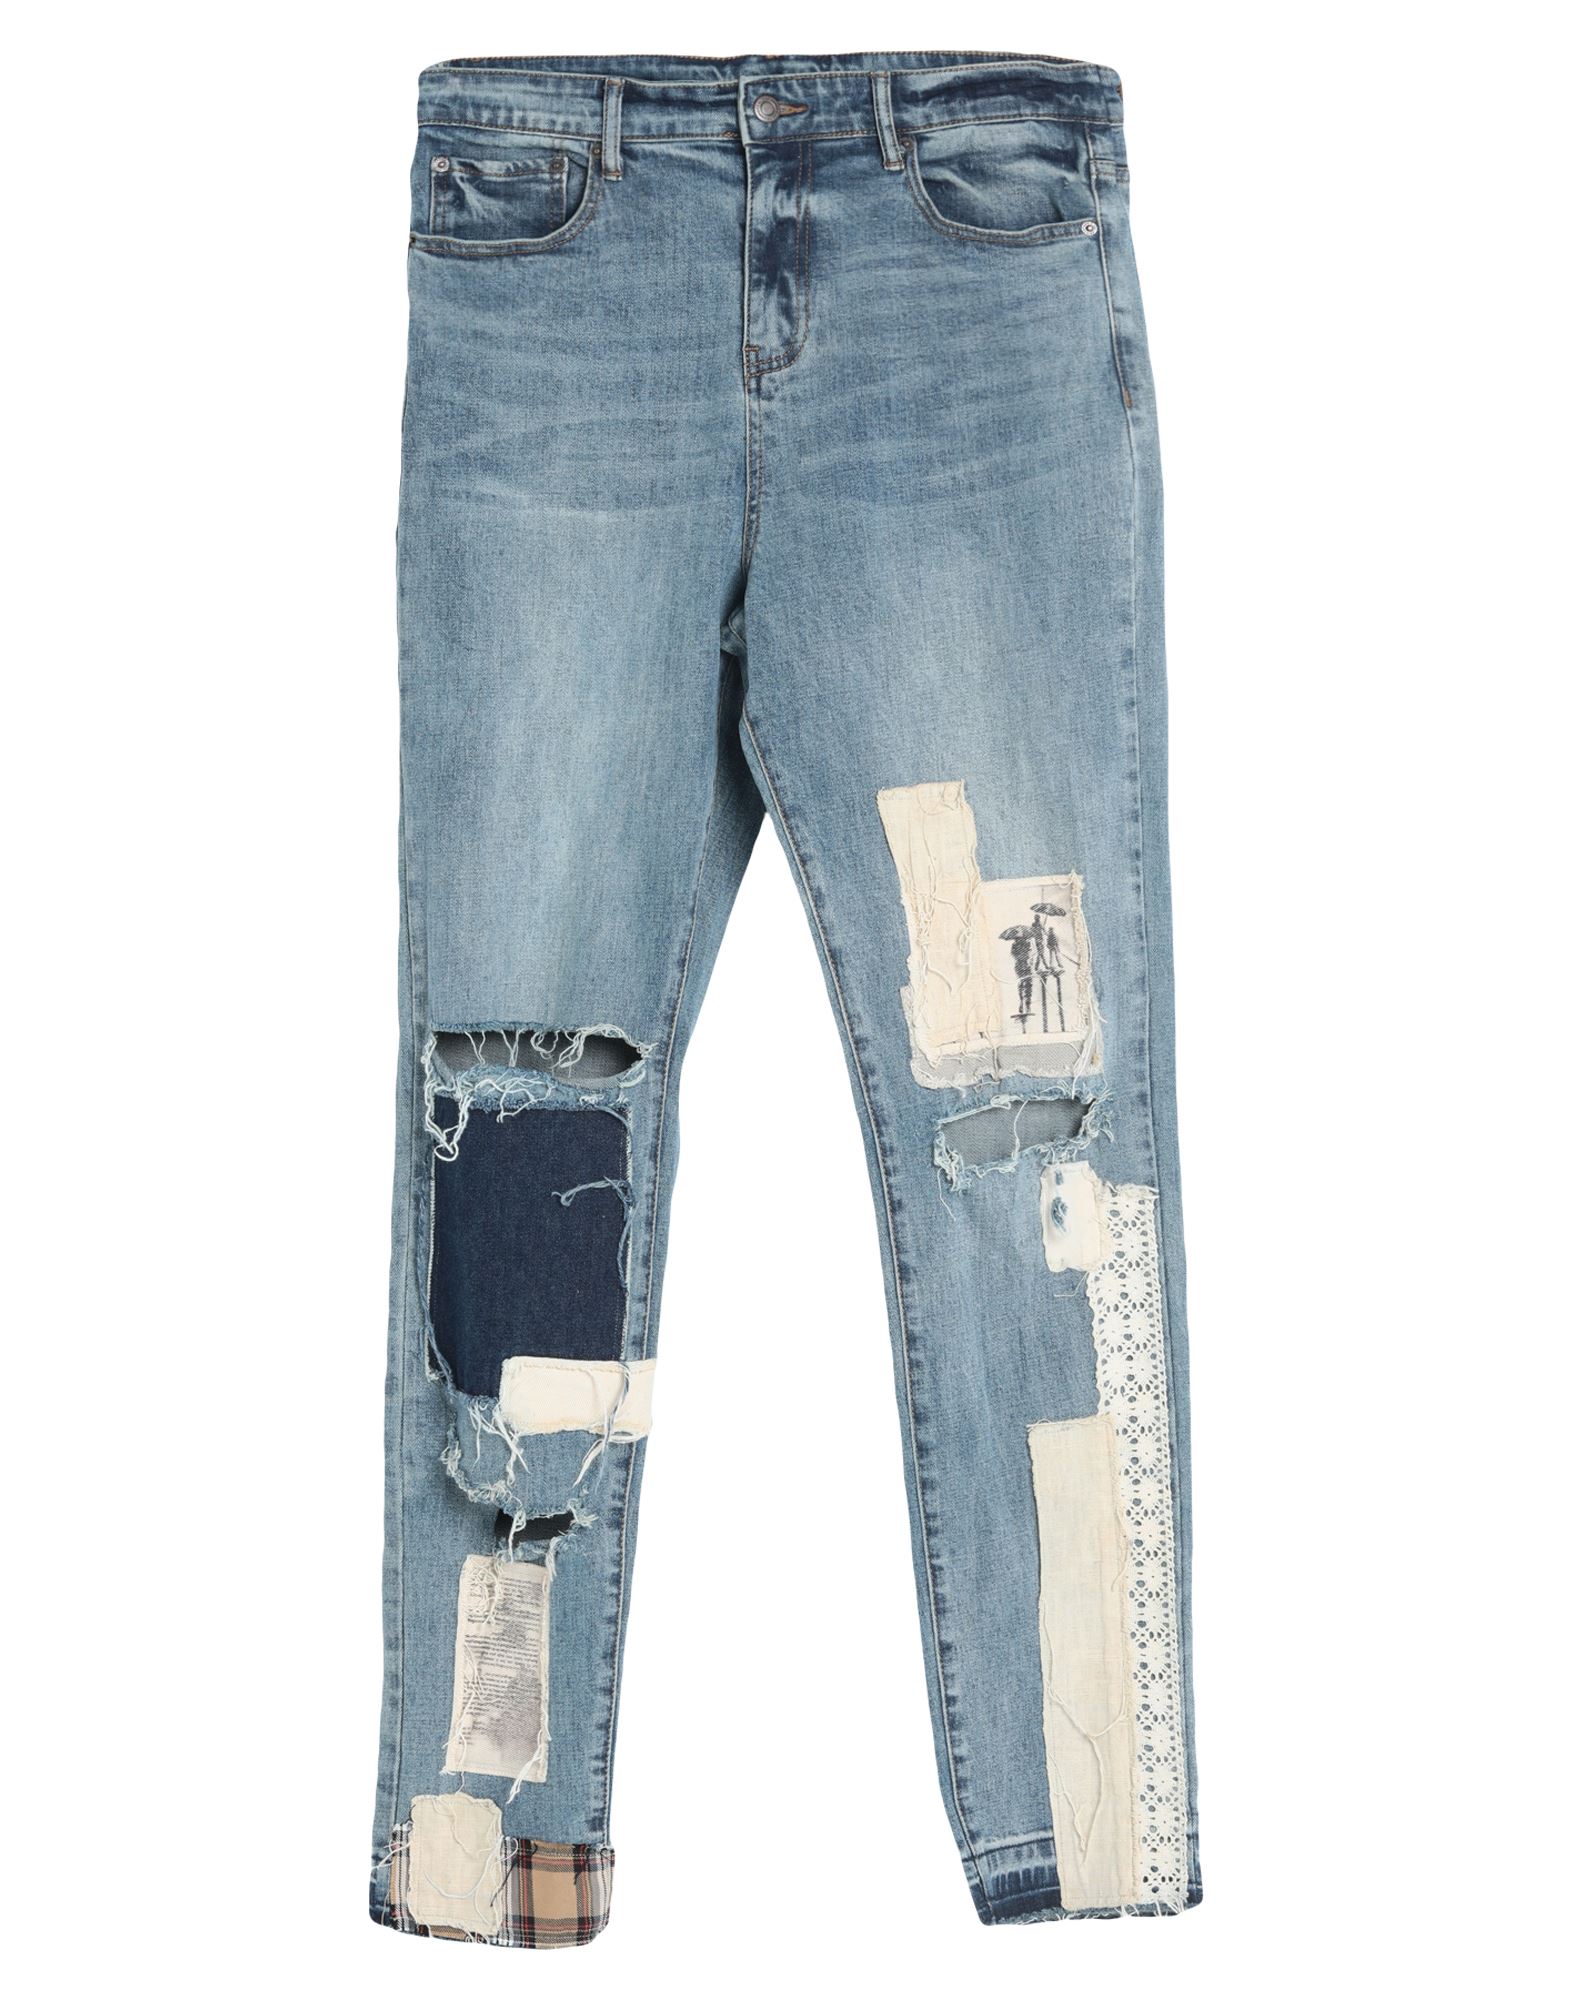 VAL KRISTOPHER JEANS